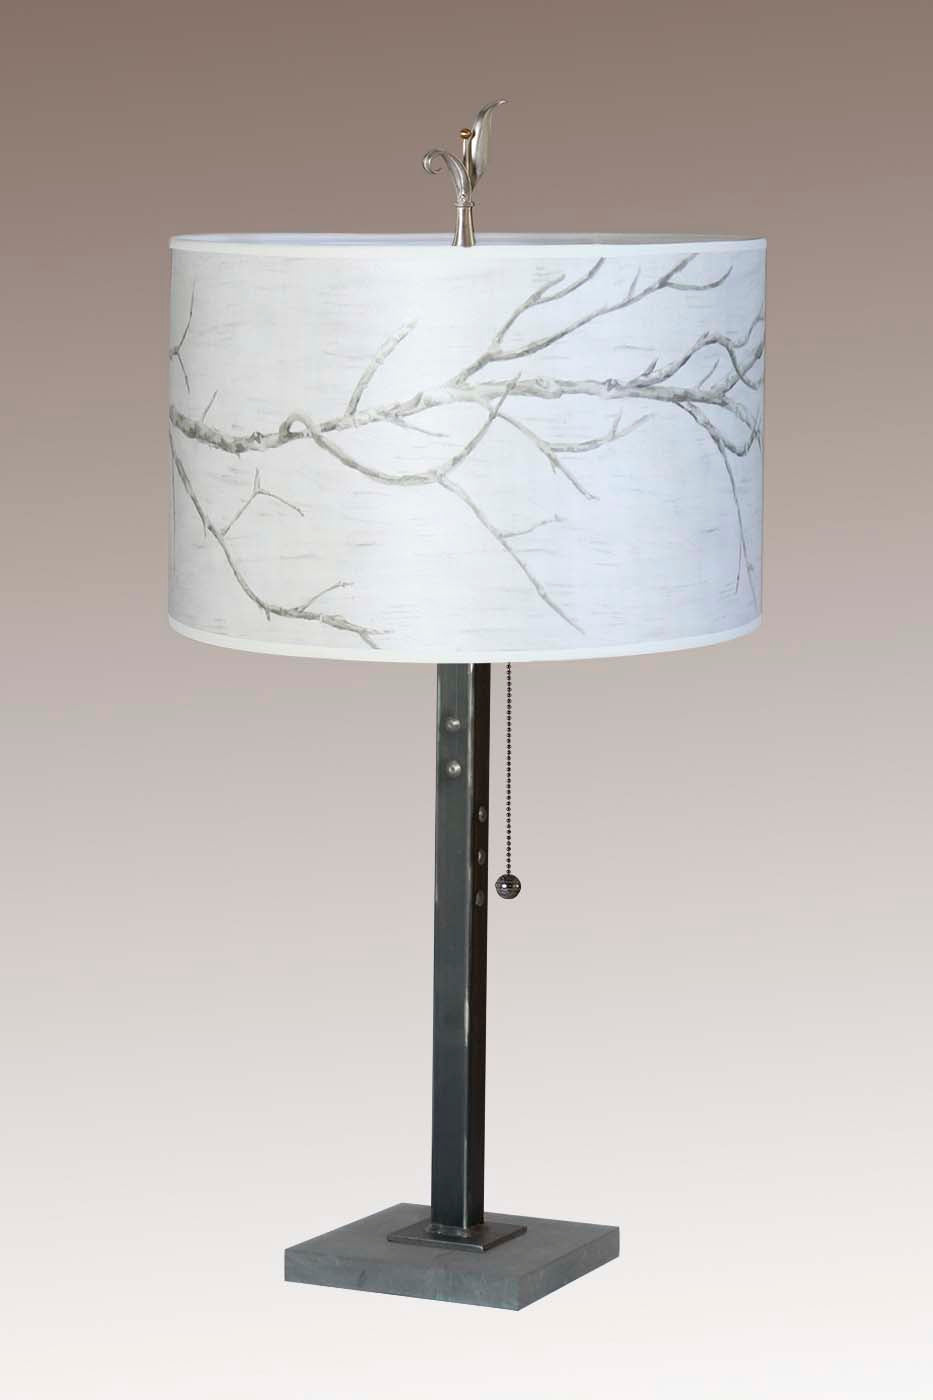 Steel Table Lamp with Large Drum Shade in Sweeping Branch